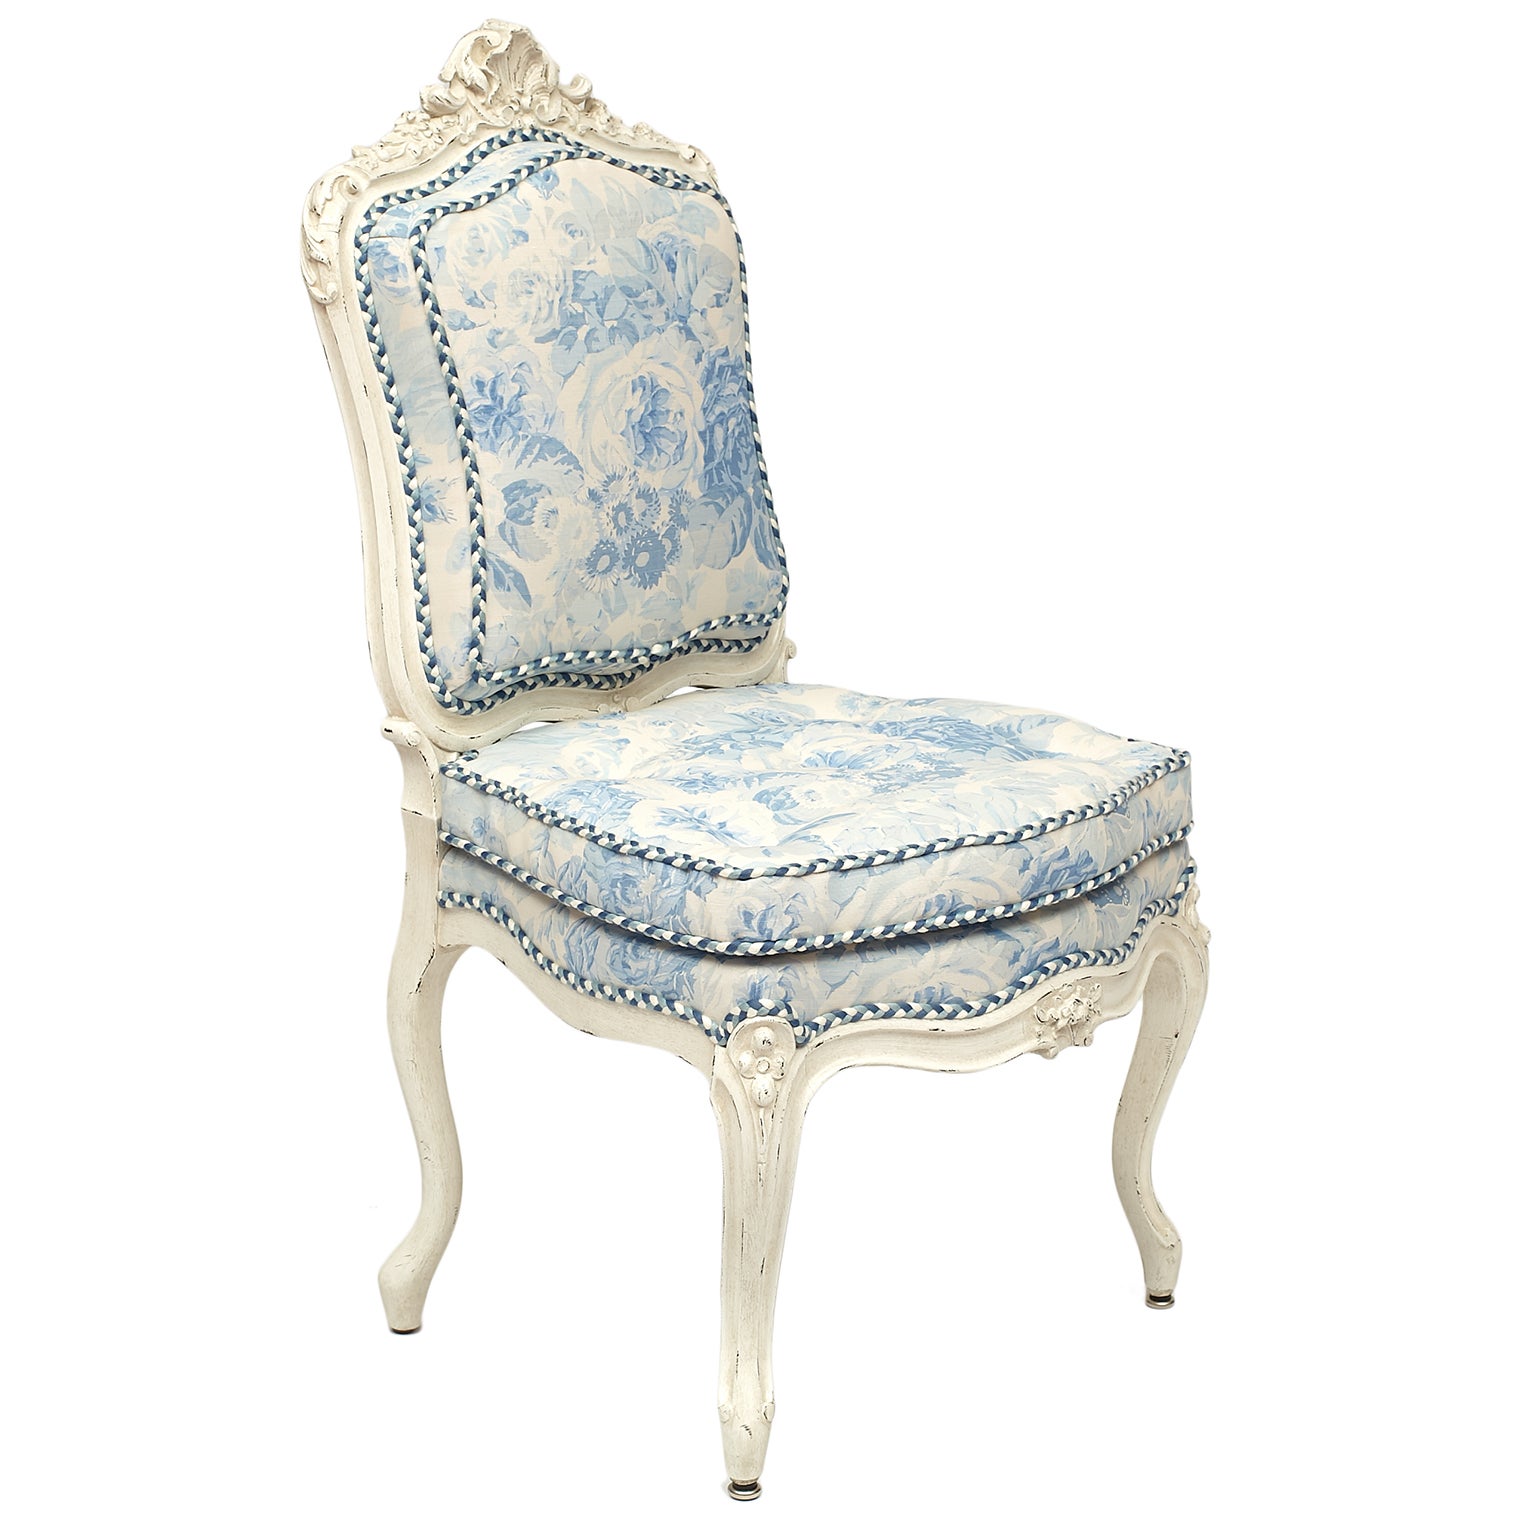 19th c. Victorian Upholstered Side Chair